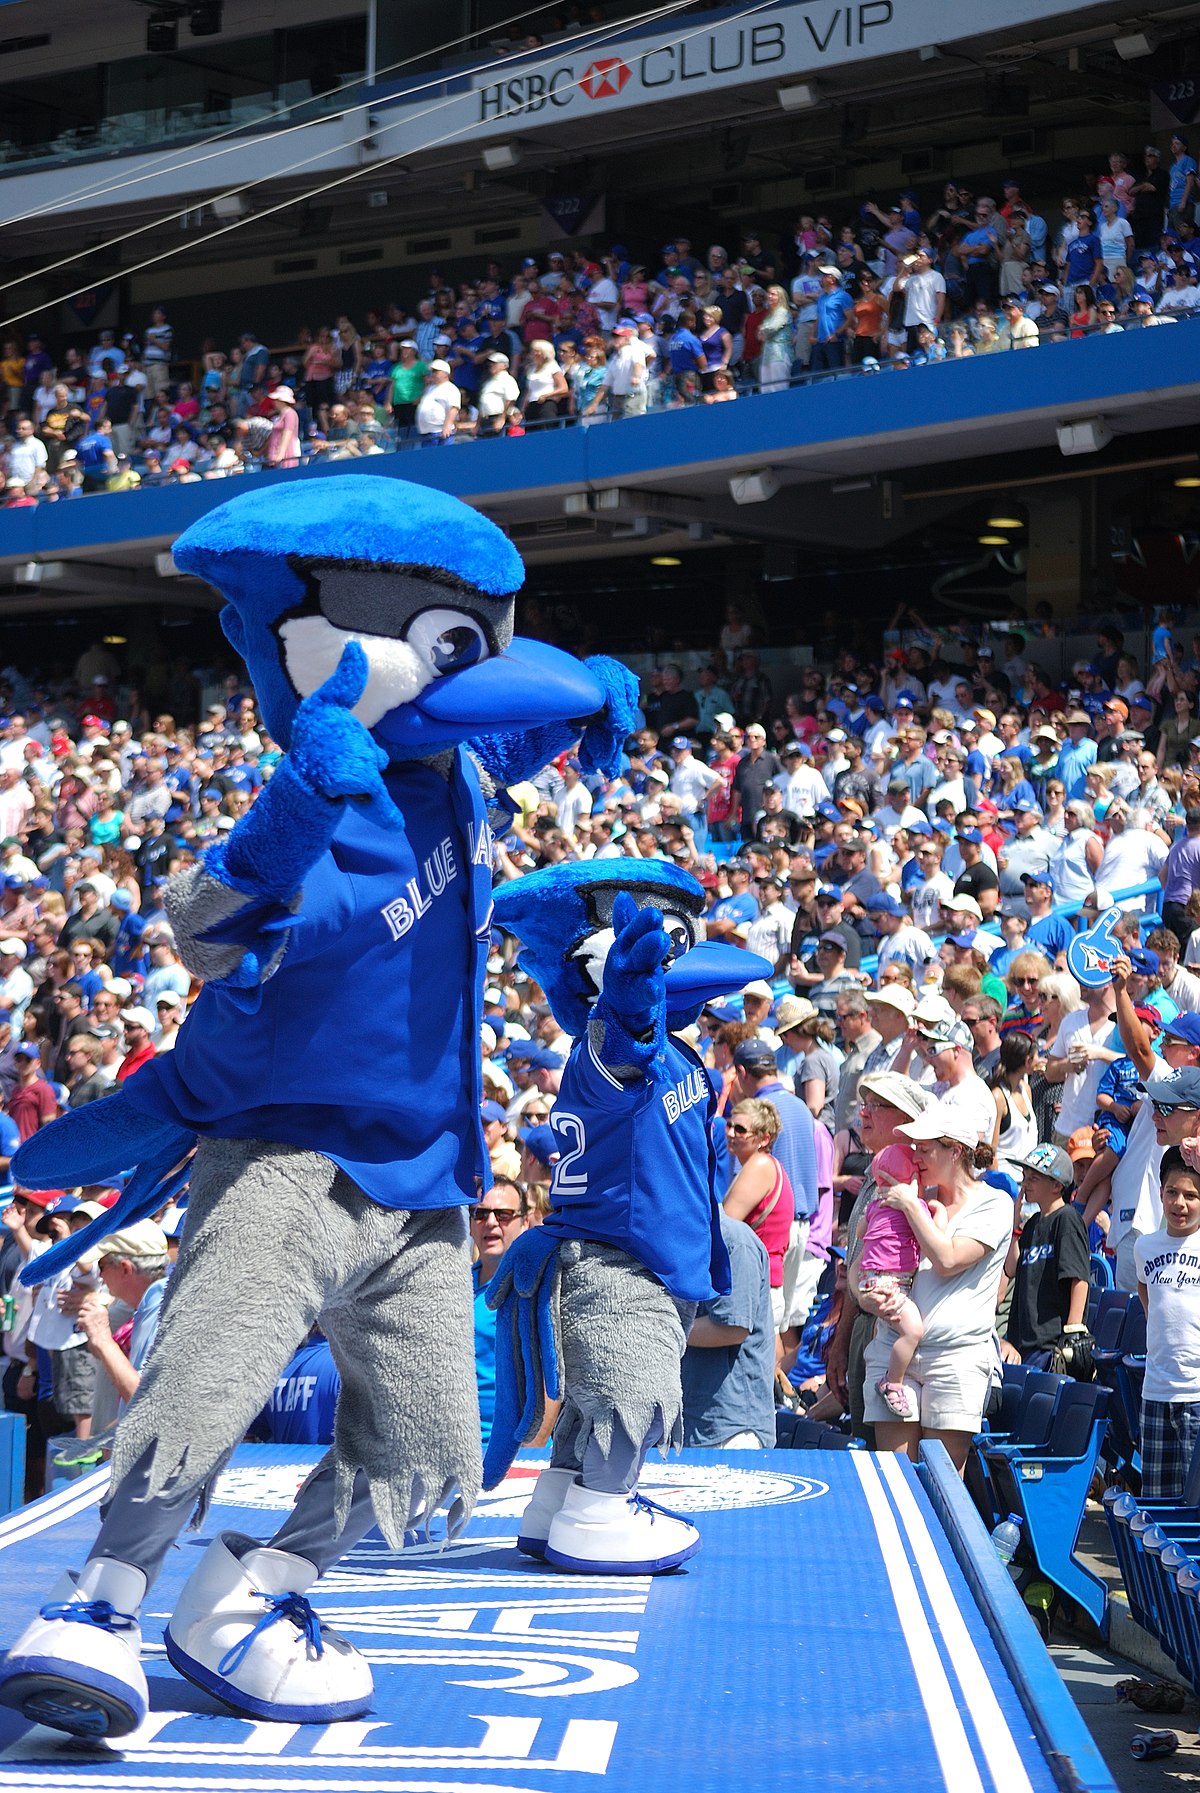 Forget Tradition: A Cubs Mascot is a Good Thing - Sports Illustrated